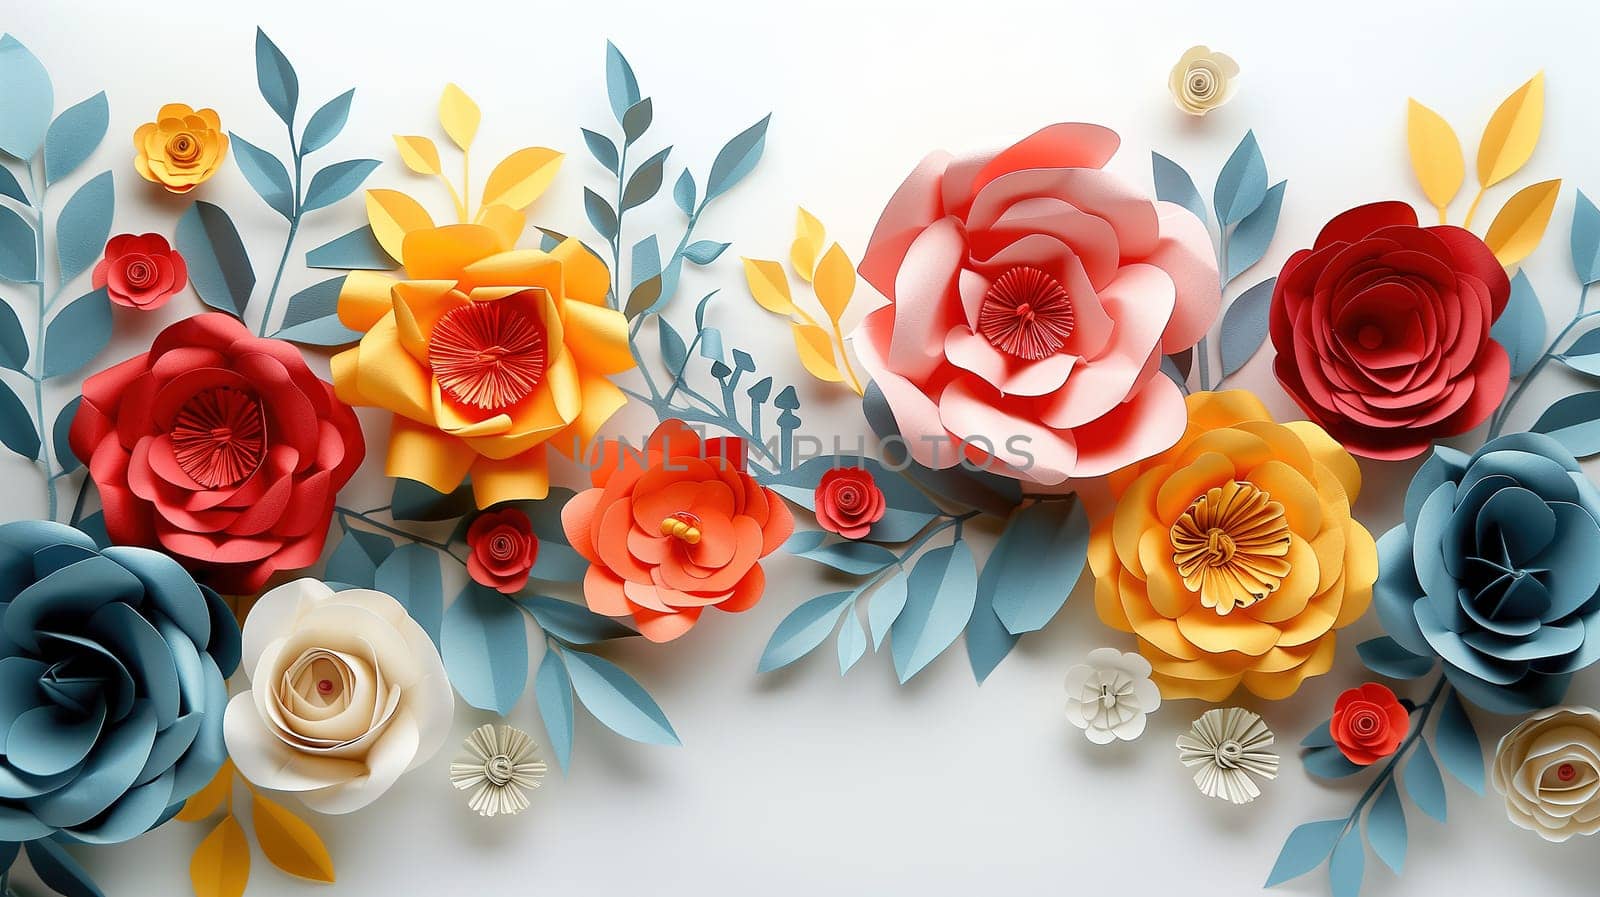 A collection of paper flowers are meticulously arranged on a clean, white surface. Each flower is carefully placed, creating a visually pleasing display.